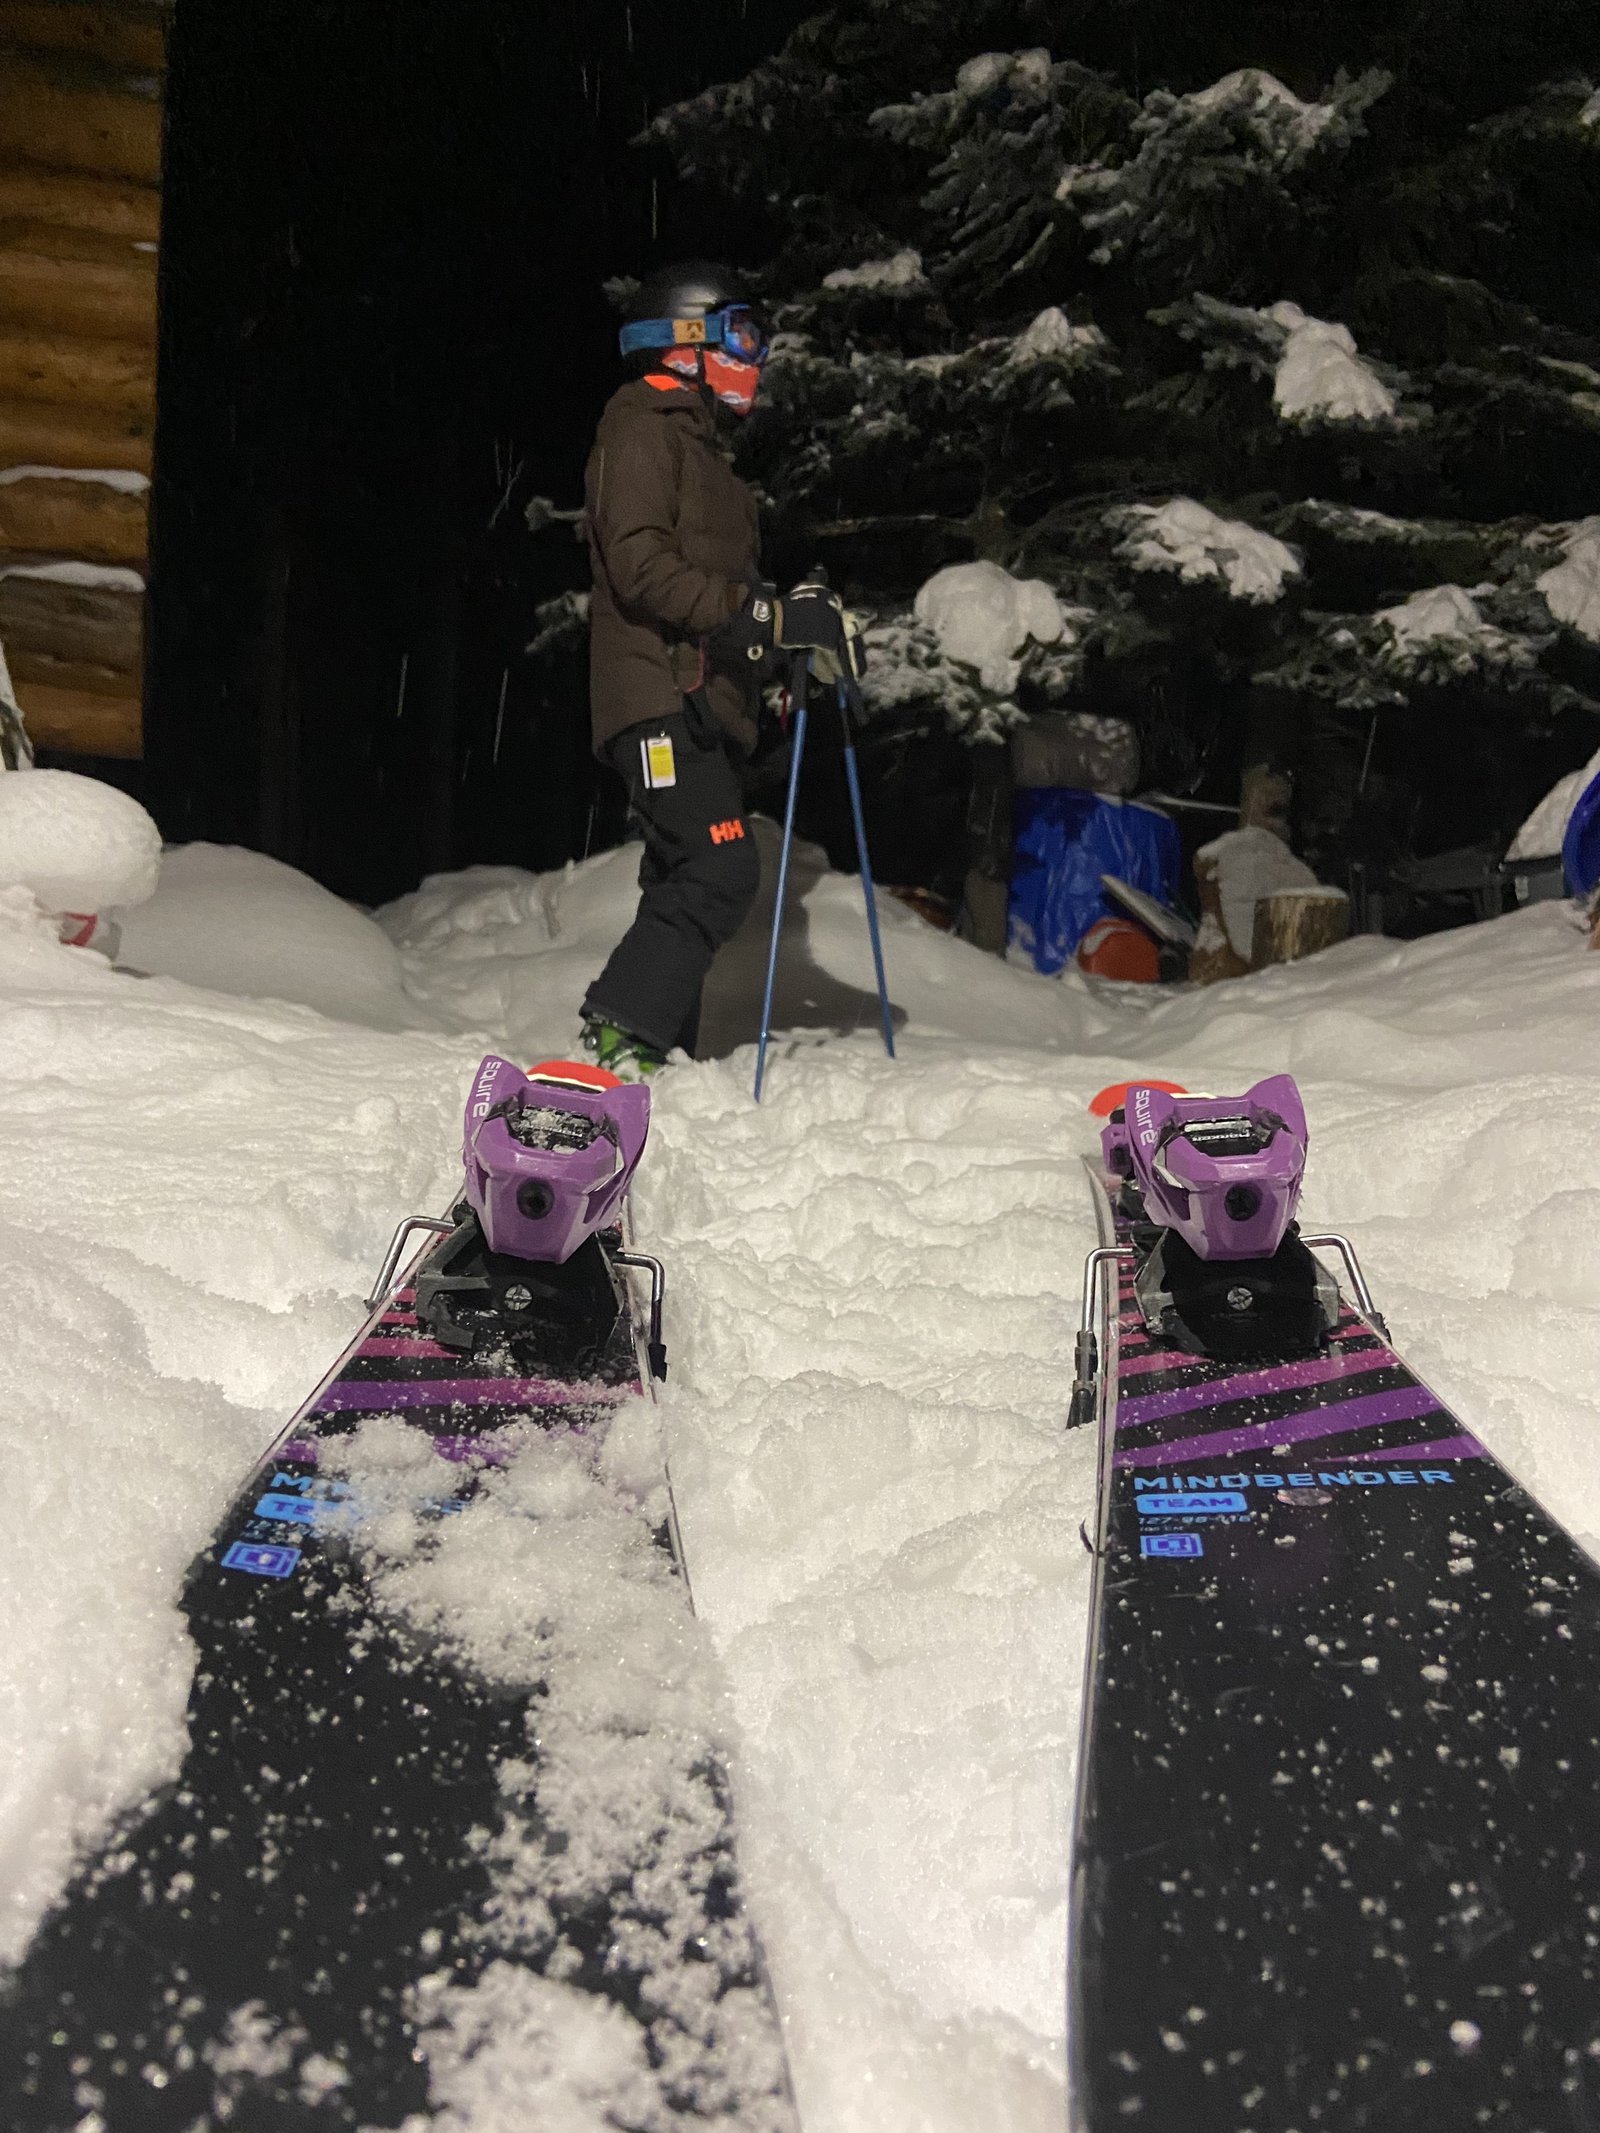 my brother love these skis